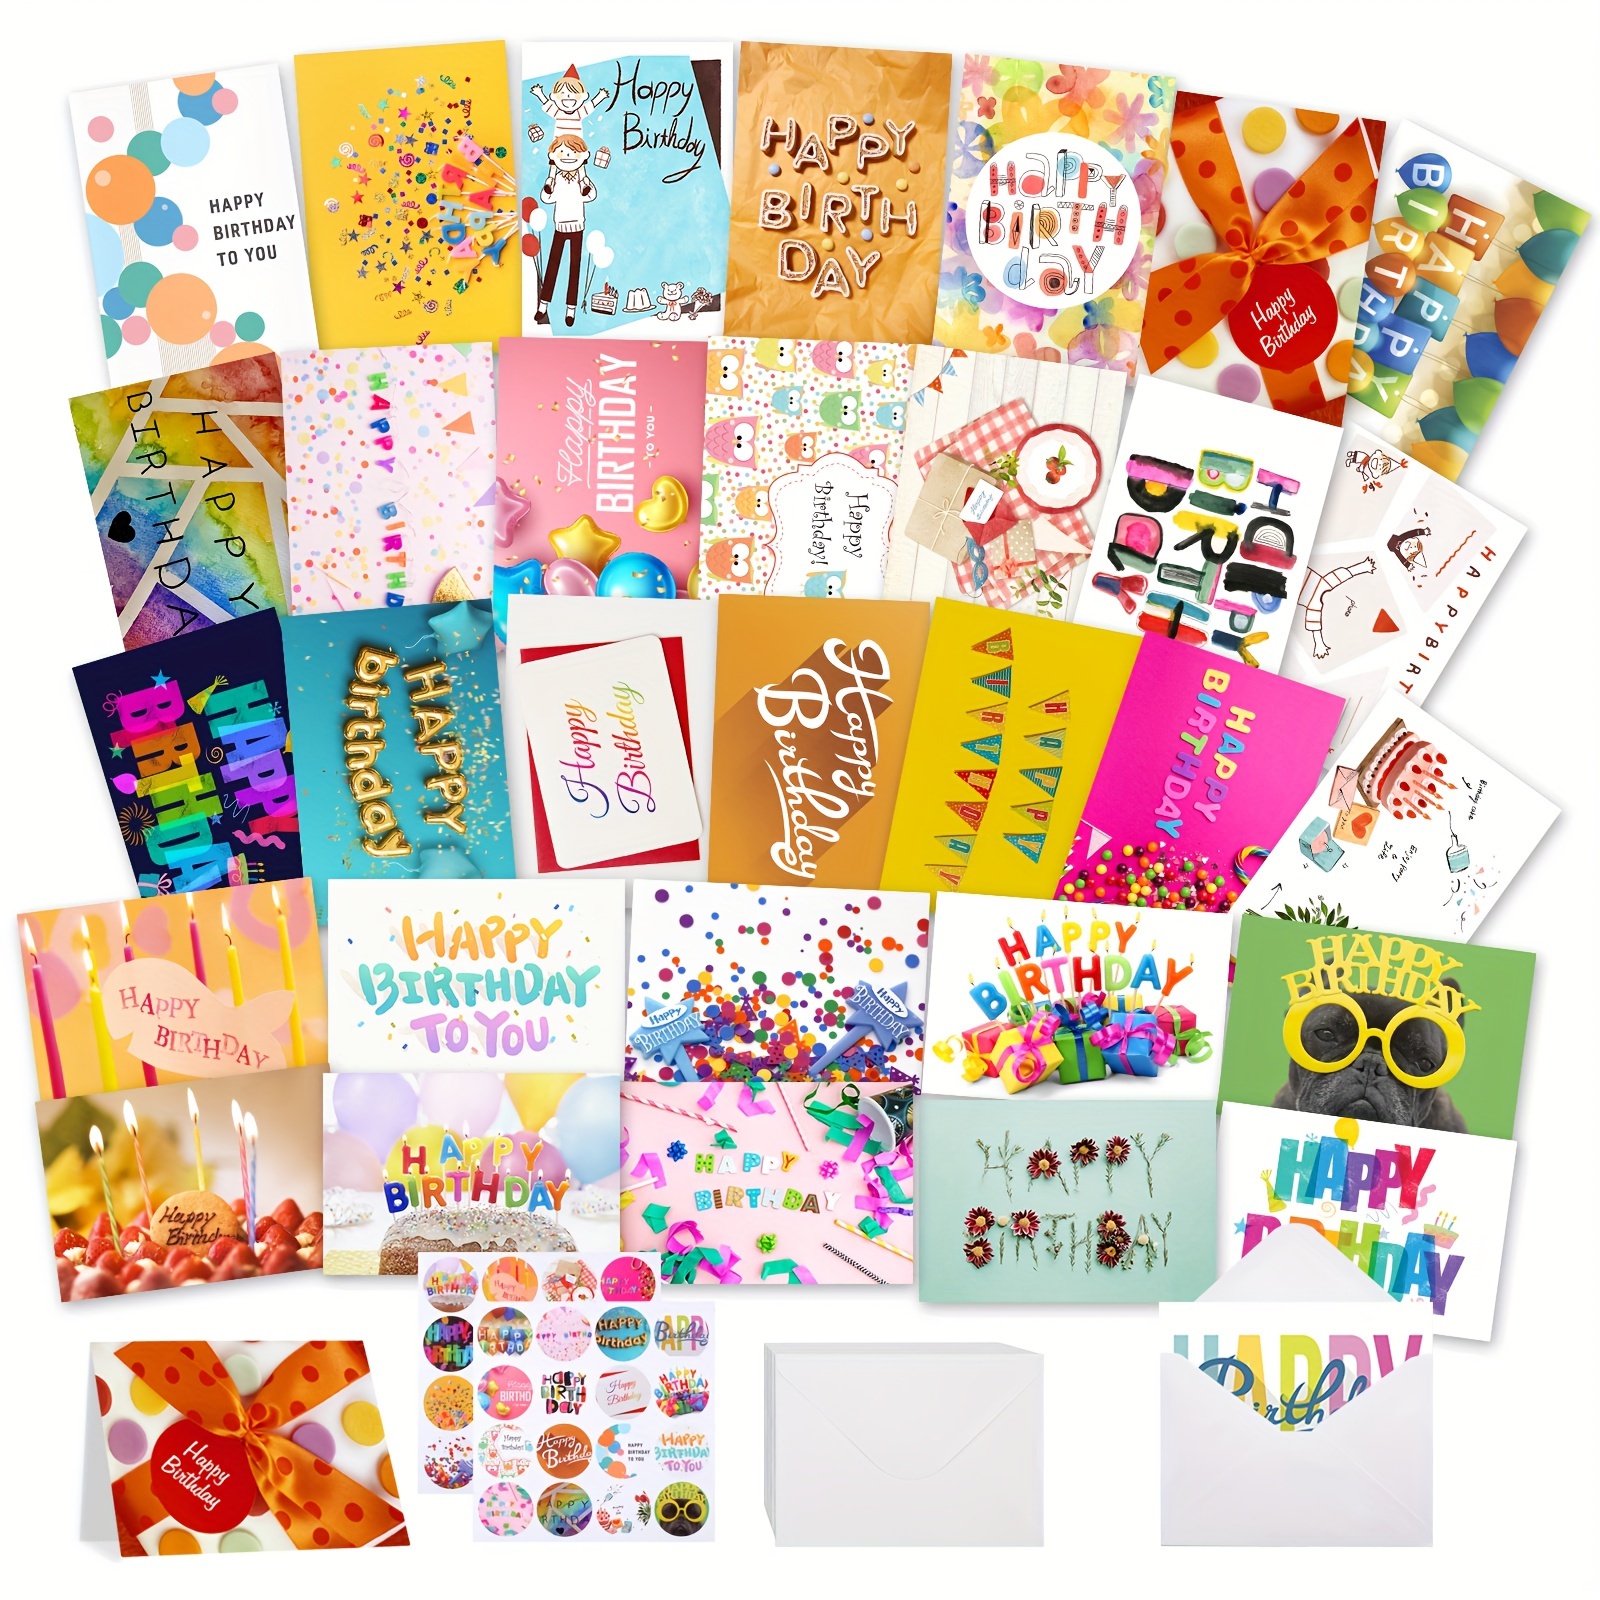 

32pcs Happy Birthday Cards And Envelopes Self-sealing, 4x6 Multi-style Happy Birthday Bulk Box, Blank Originality Birthday Cards For Birthday Cards Pack For School, Office, Family, Friends